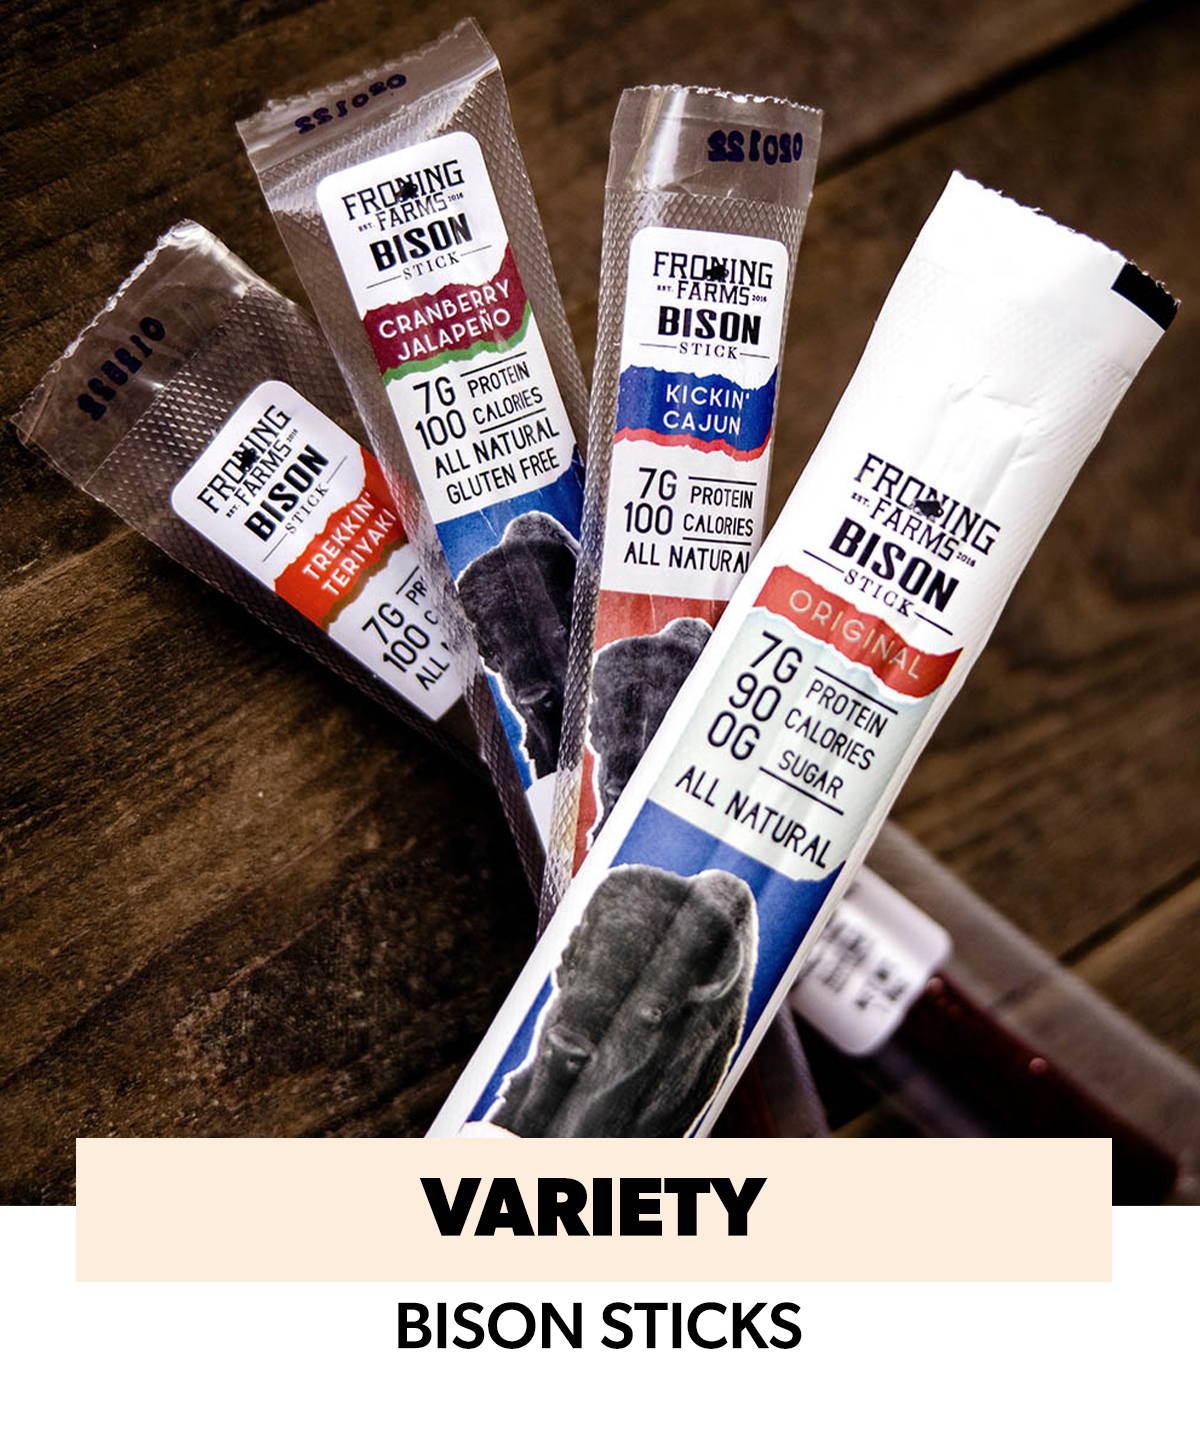 Froning Farms Bison Sticks Variety Flavors